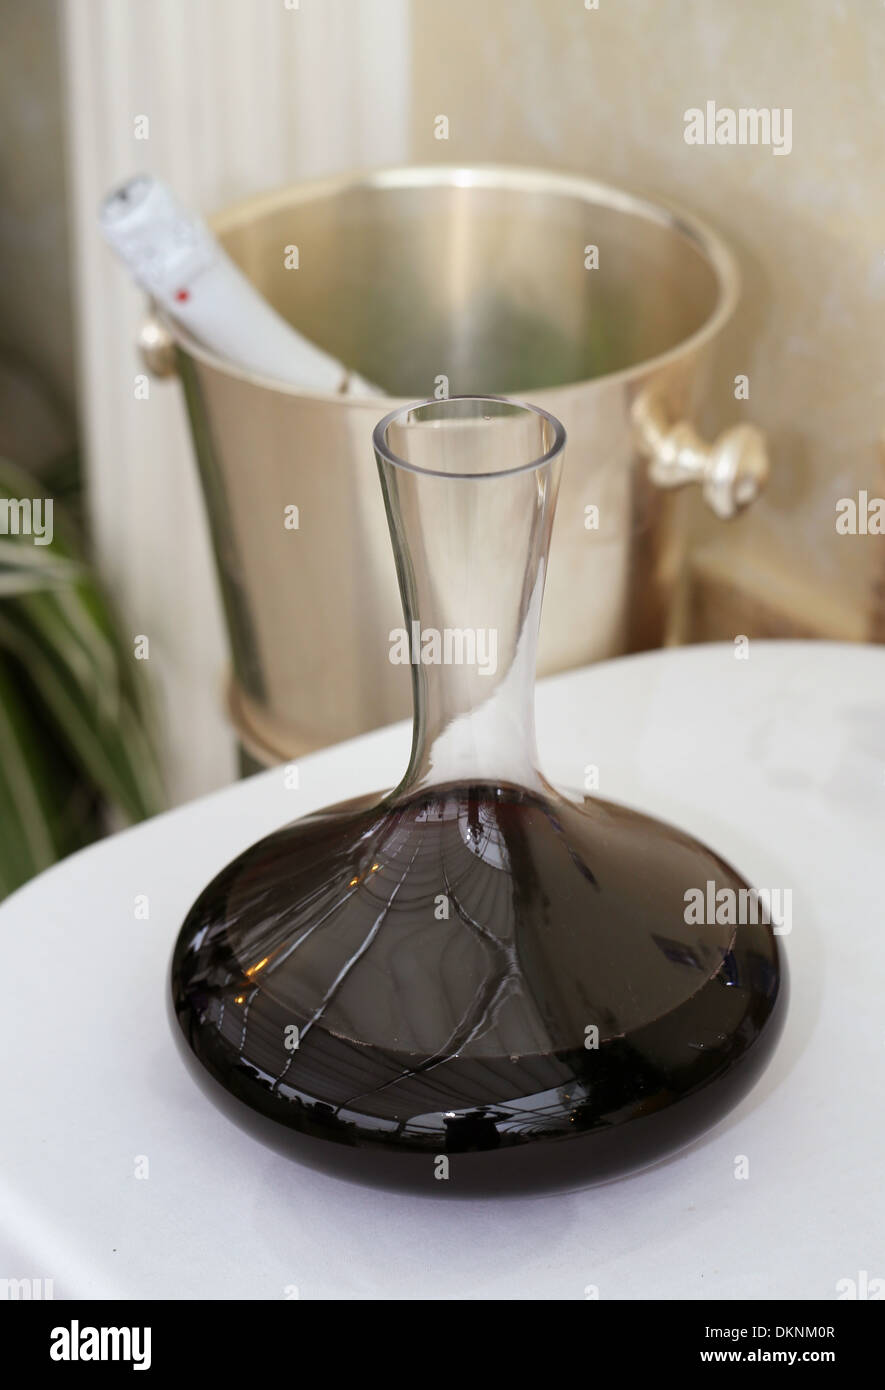 Carafe with red wine Stock Photo